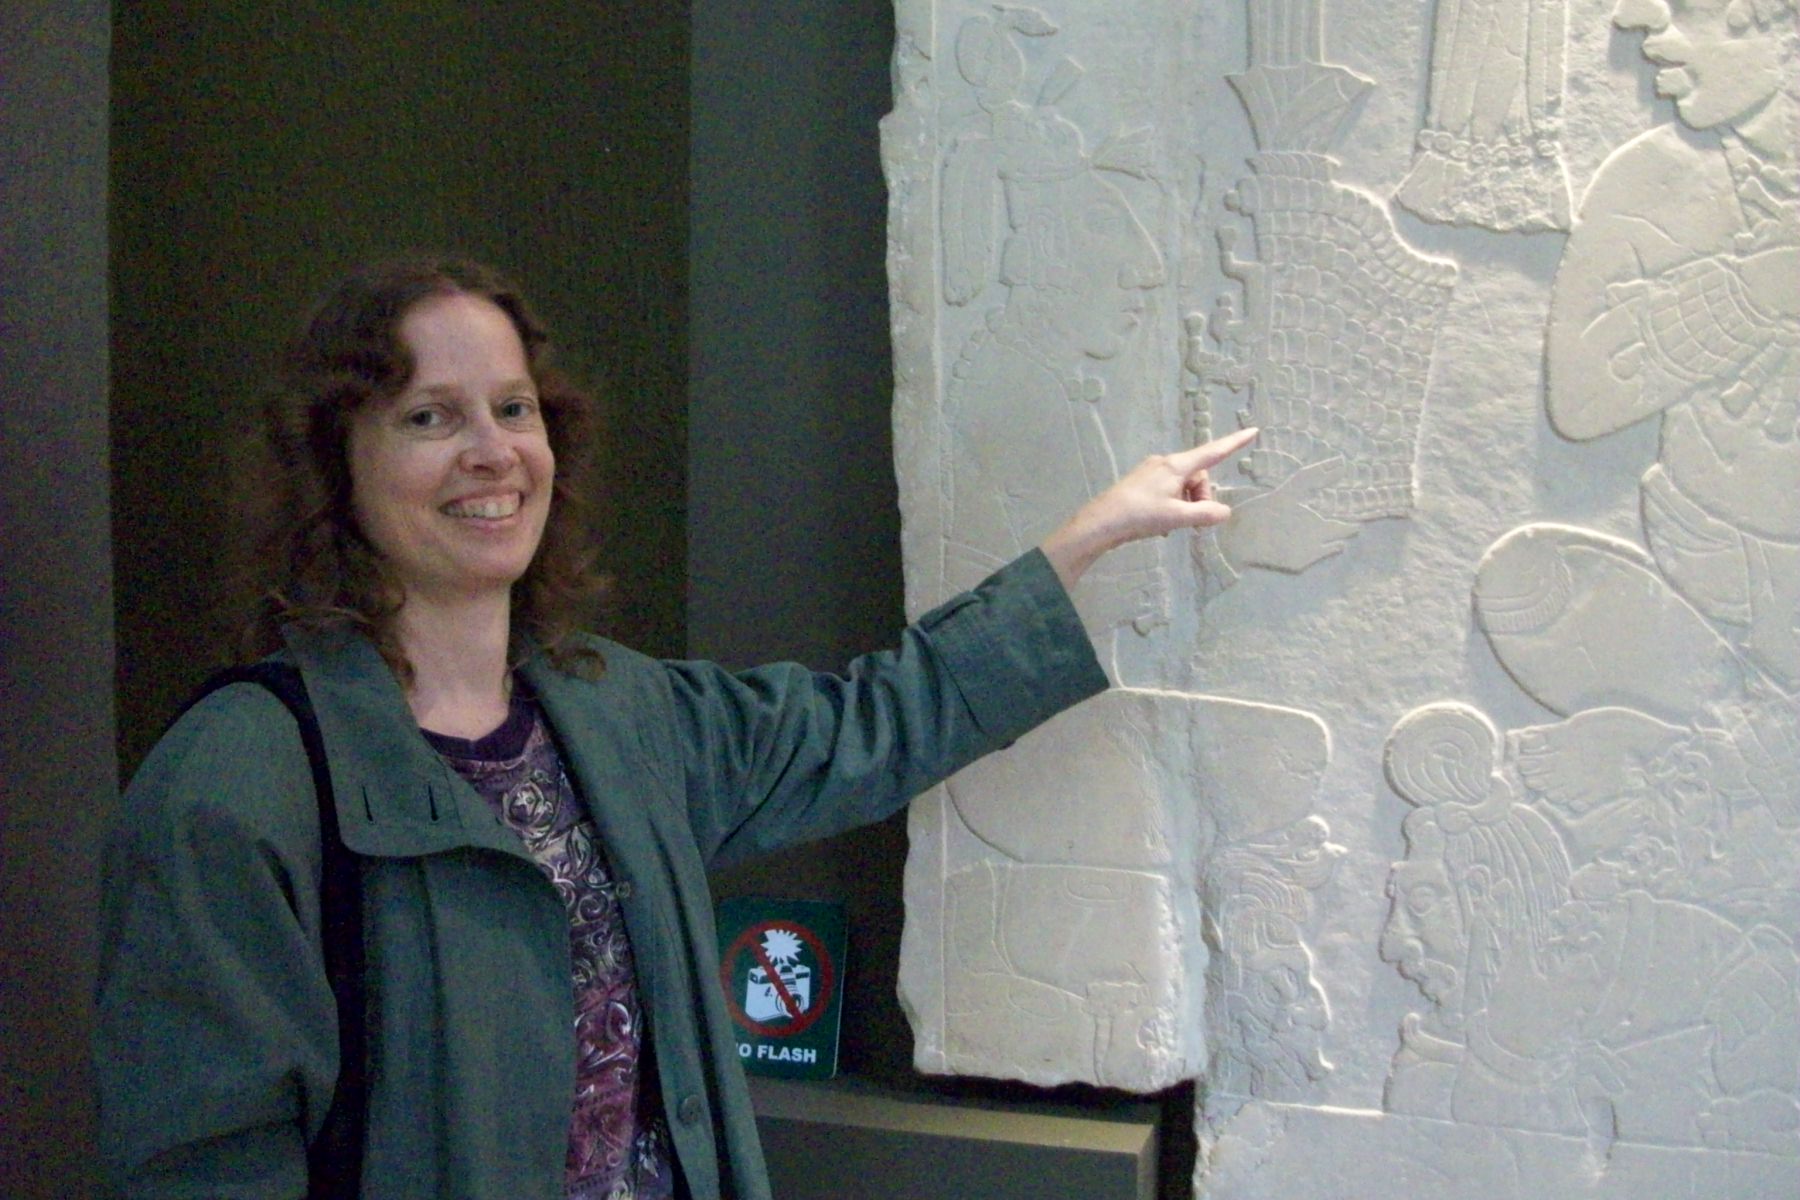 Dr.Gaby Vail pointing out a detail in the Mayan stela in Palenque.